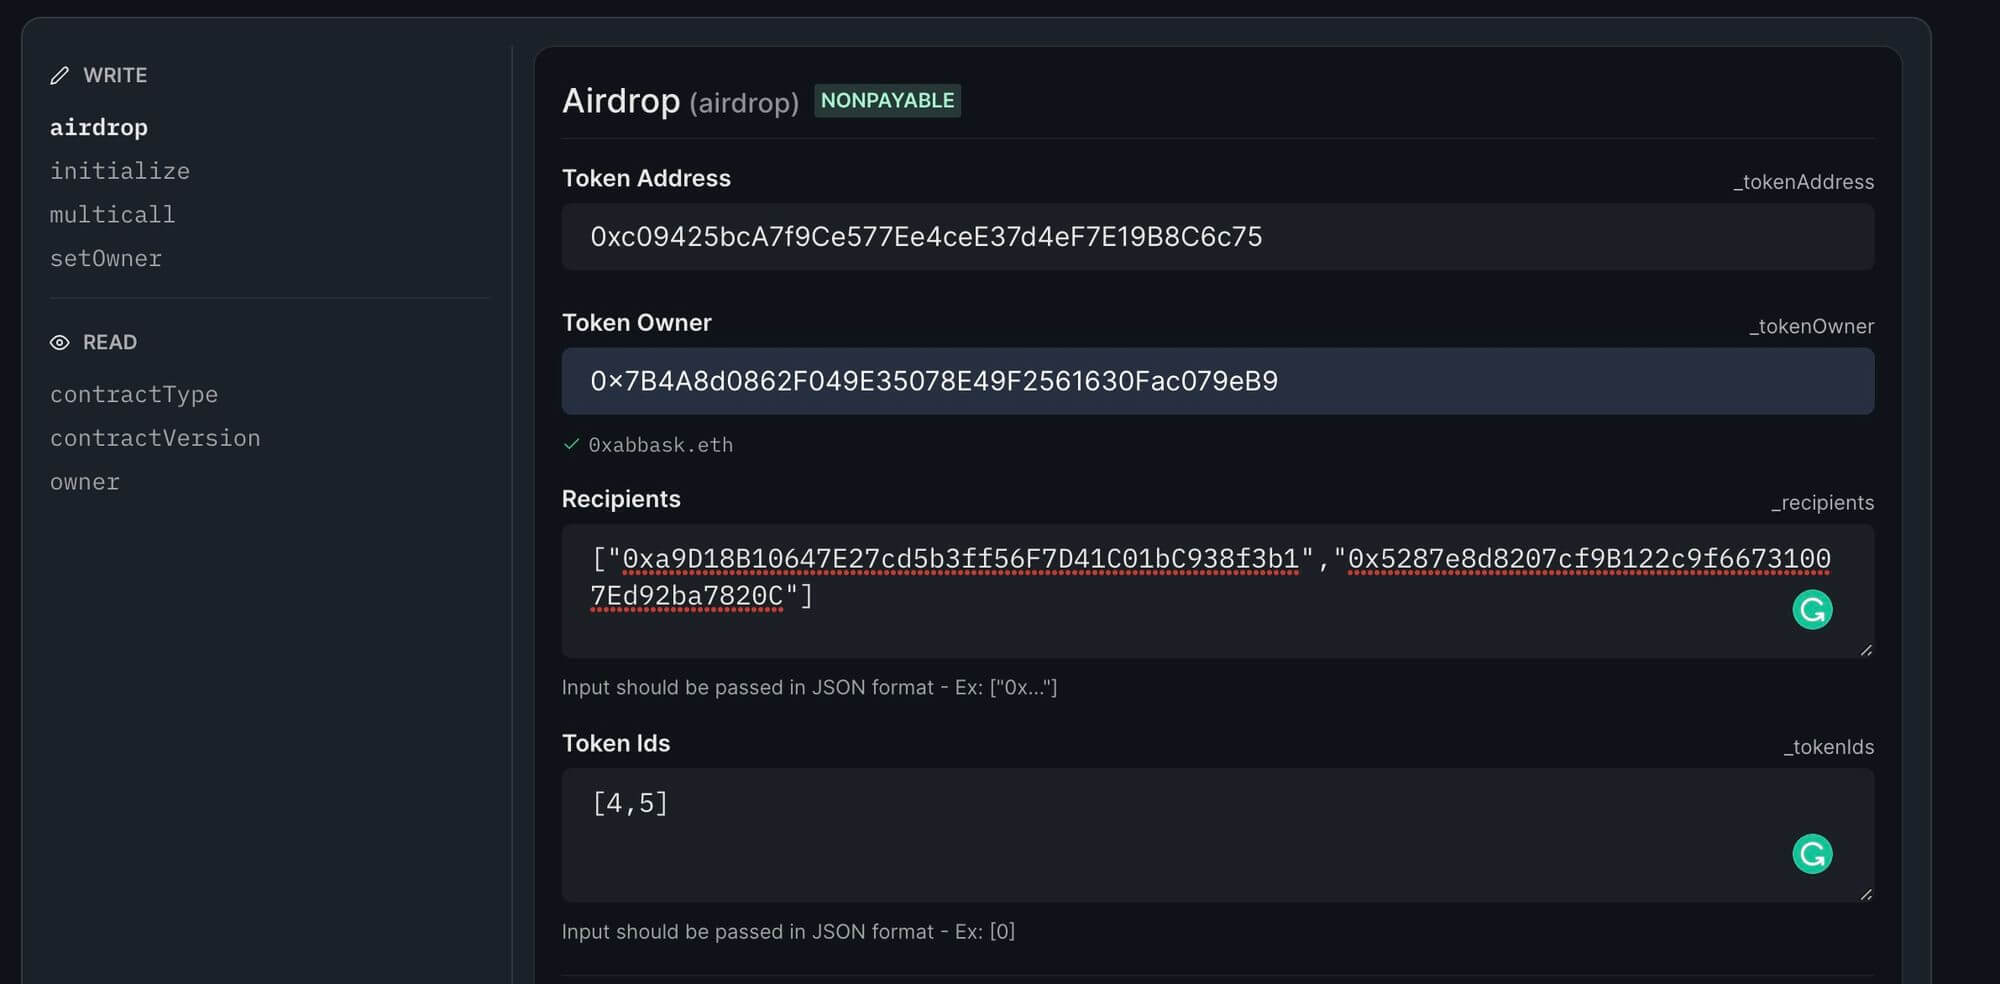 Add the details for airdropping the tokens